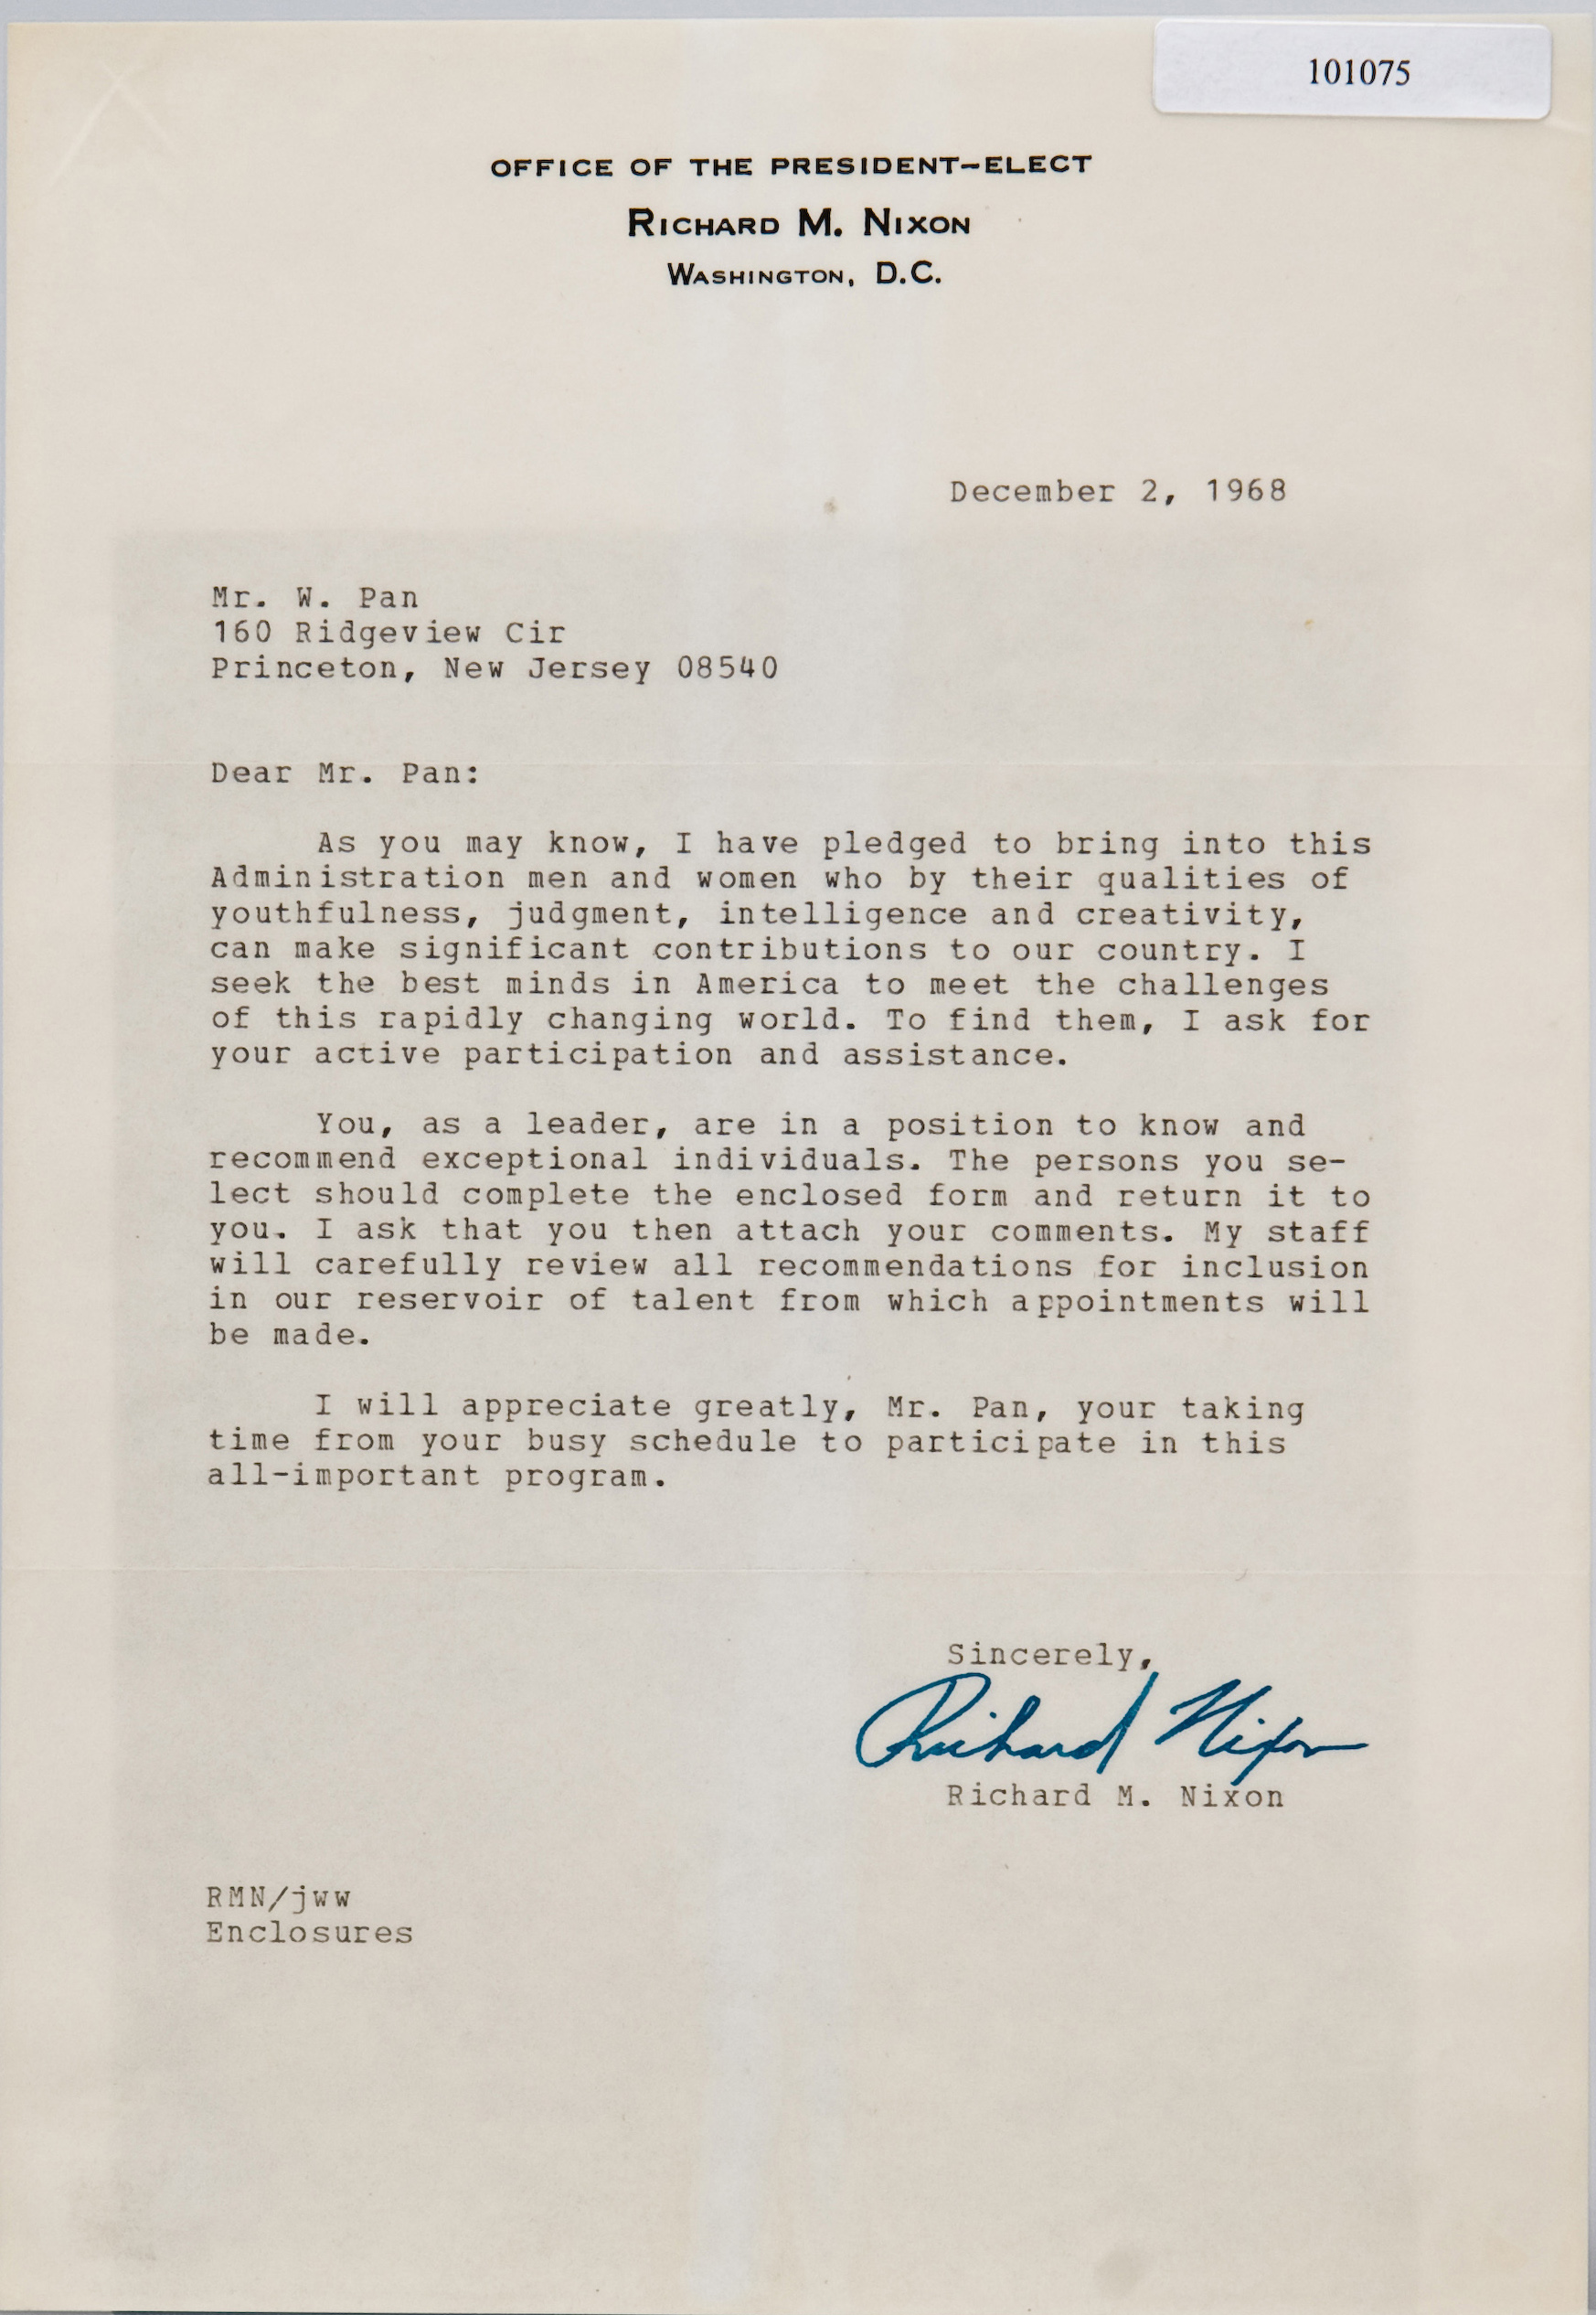 A letter from President Nixon.